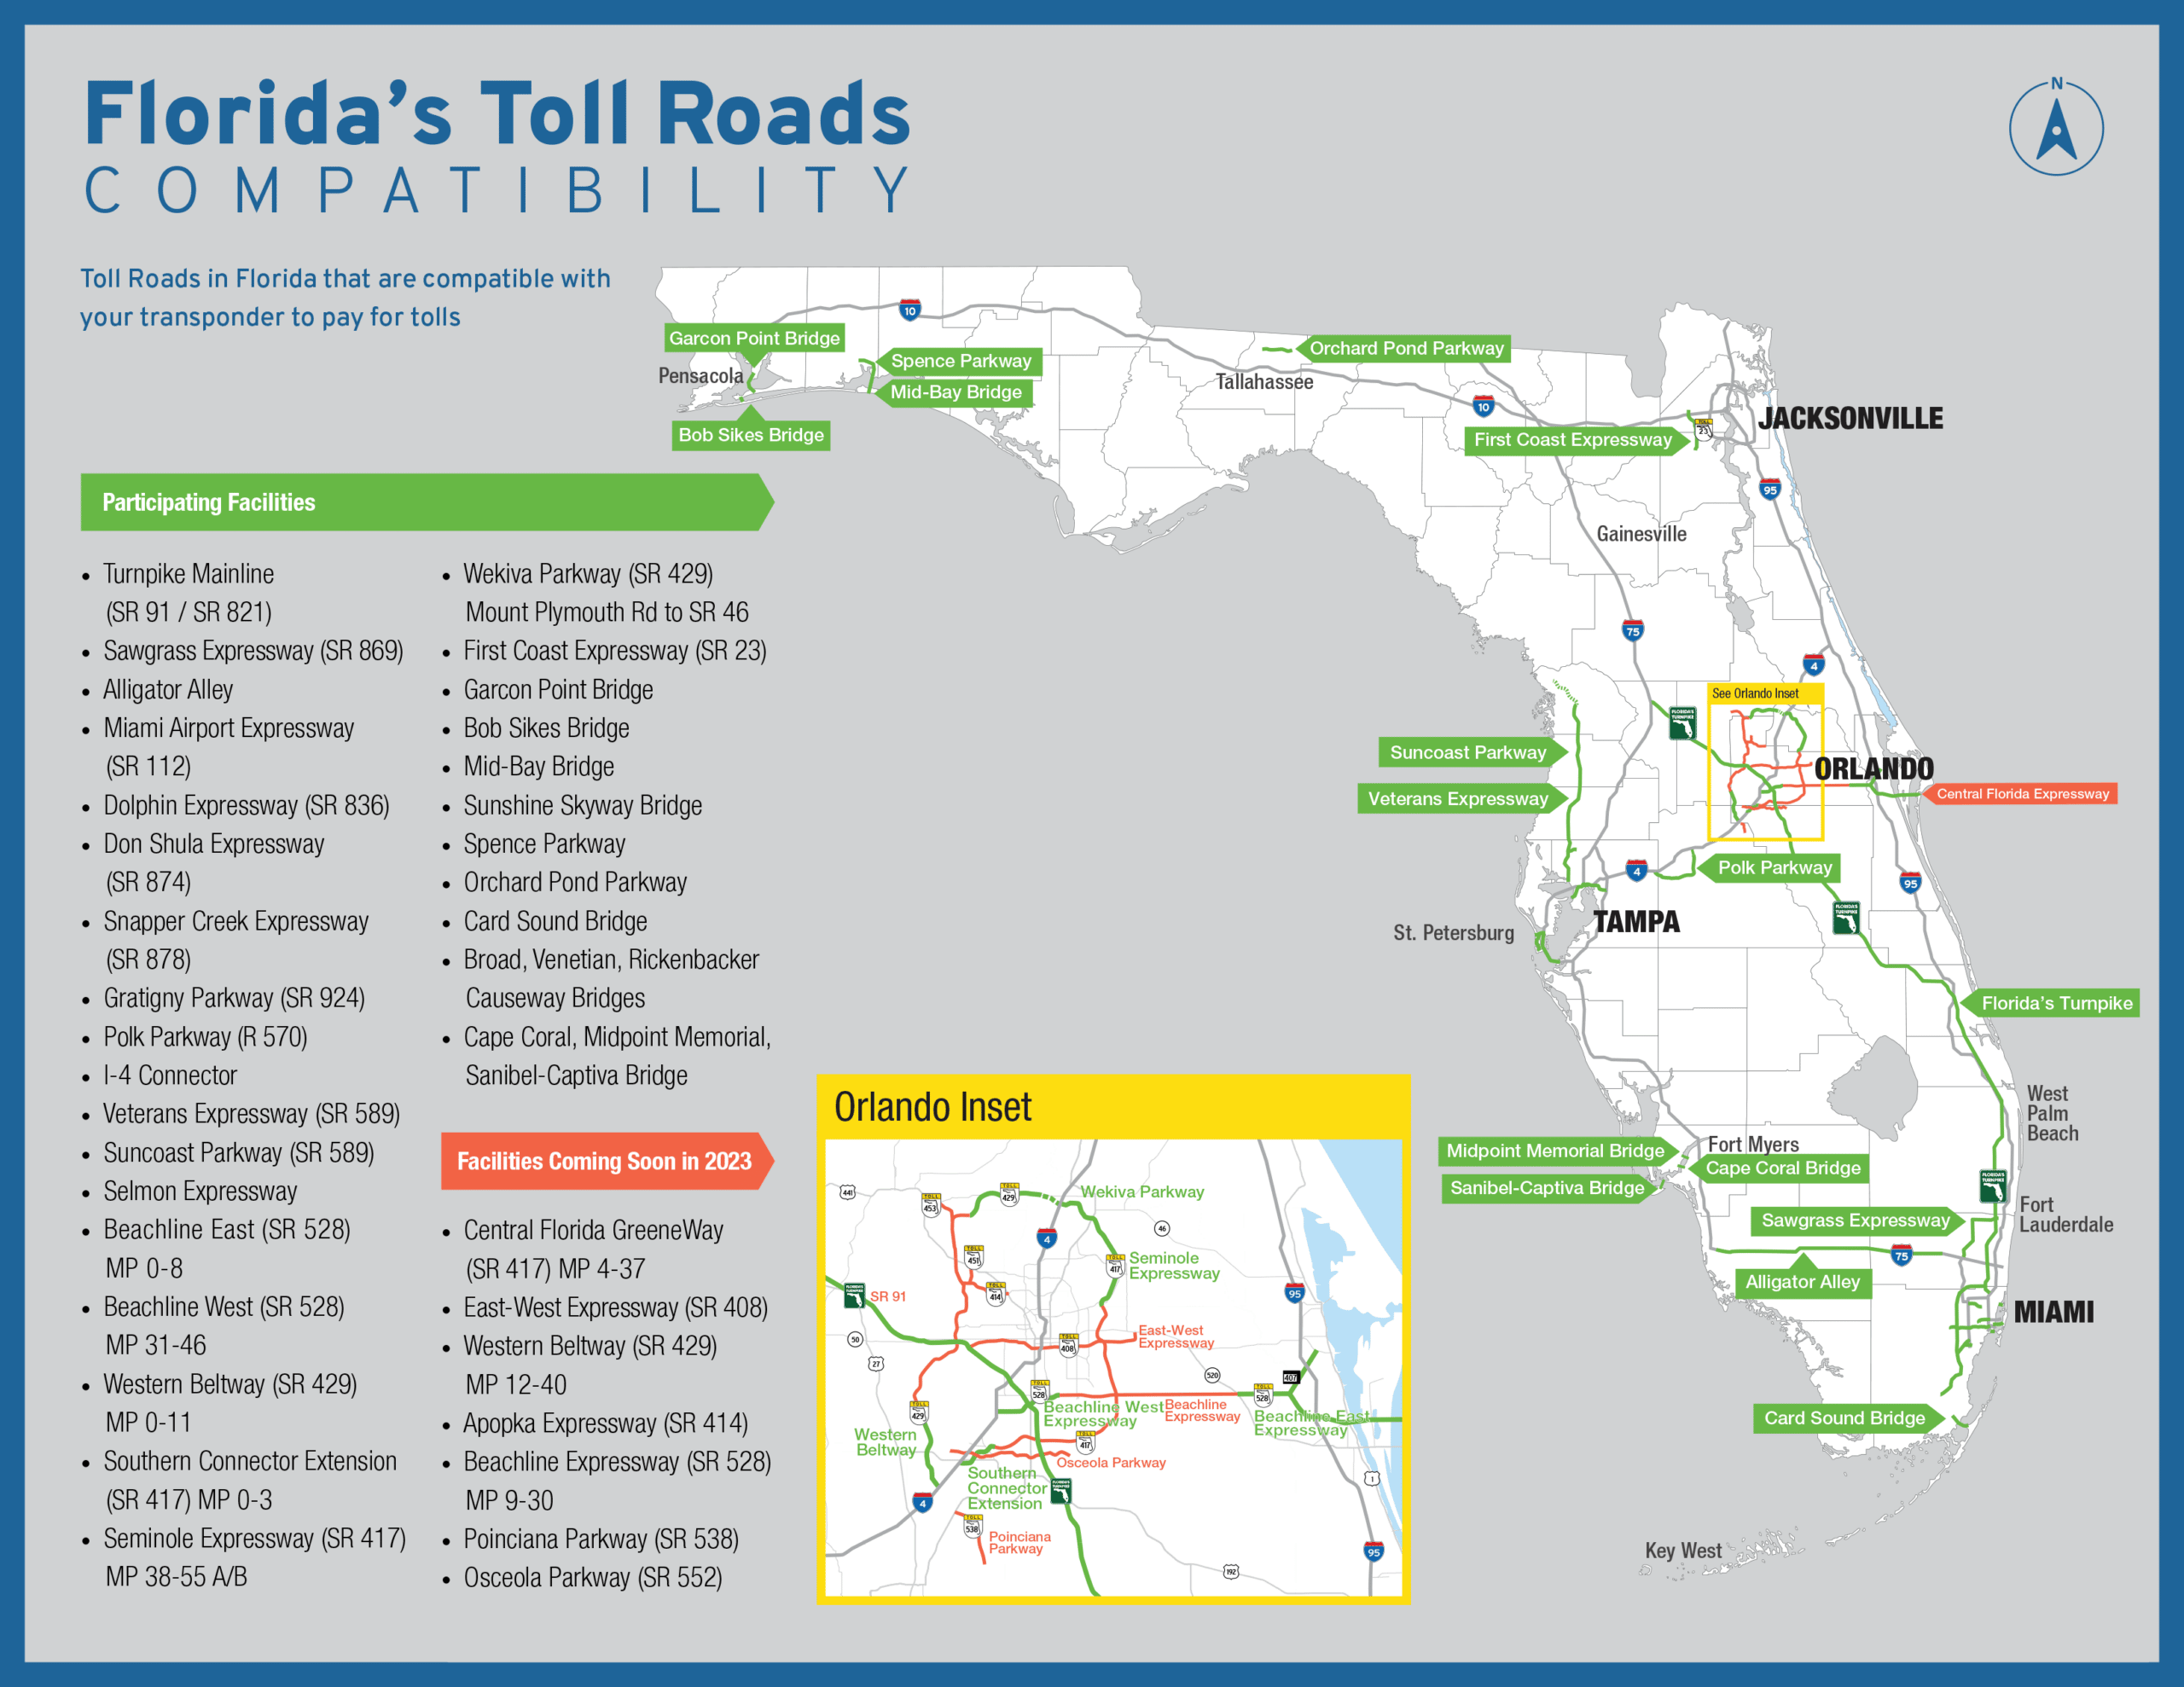 Toll Roads in Florida hq image